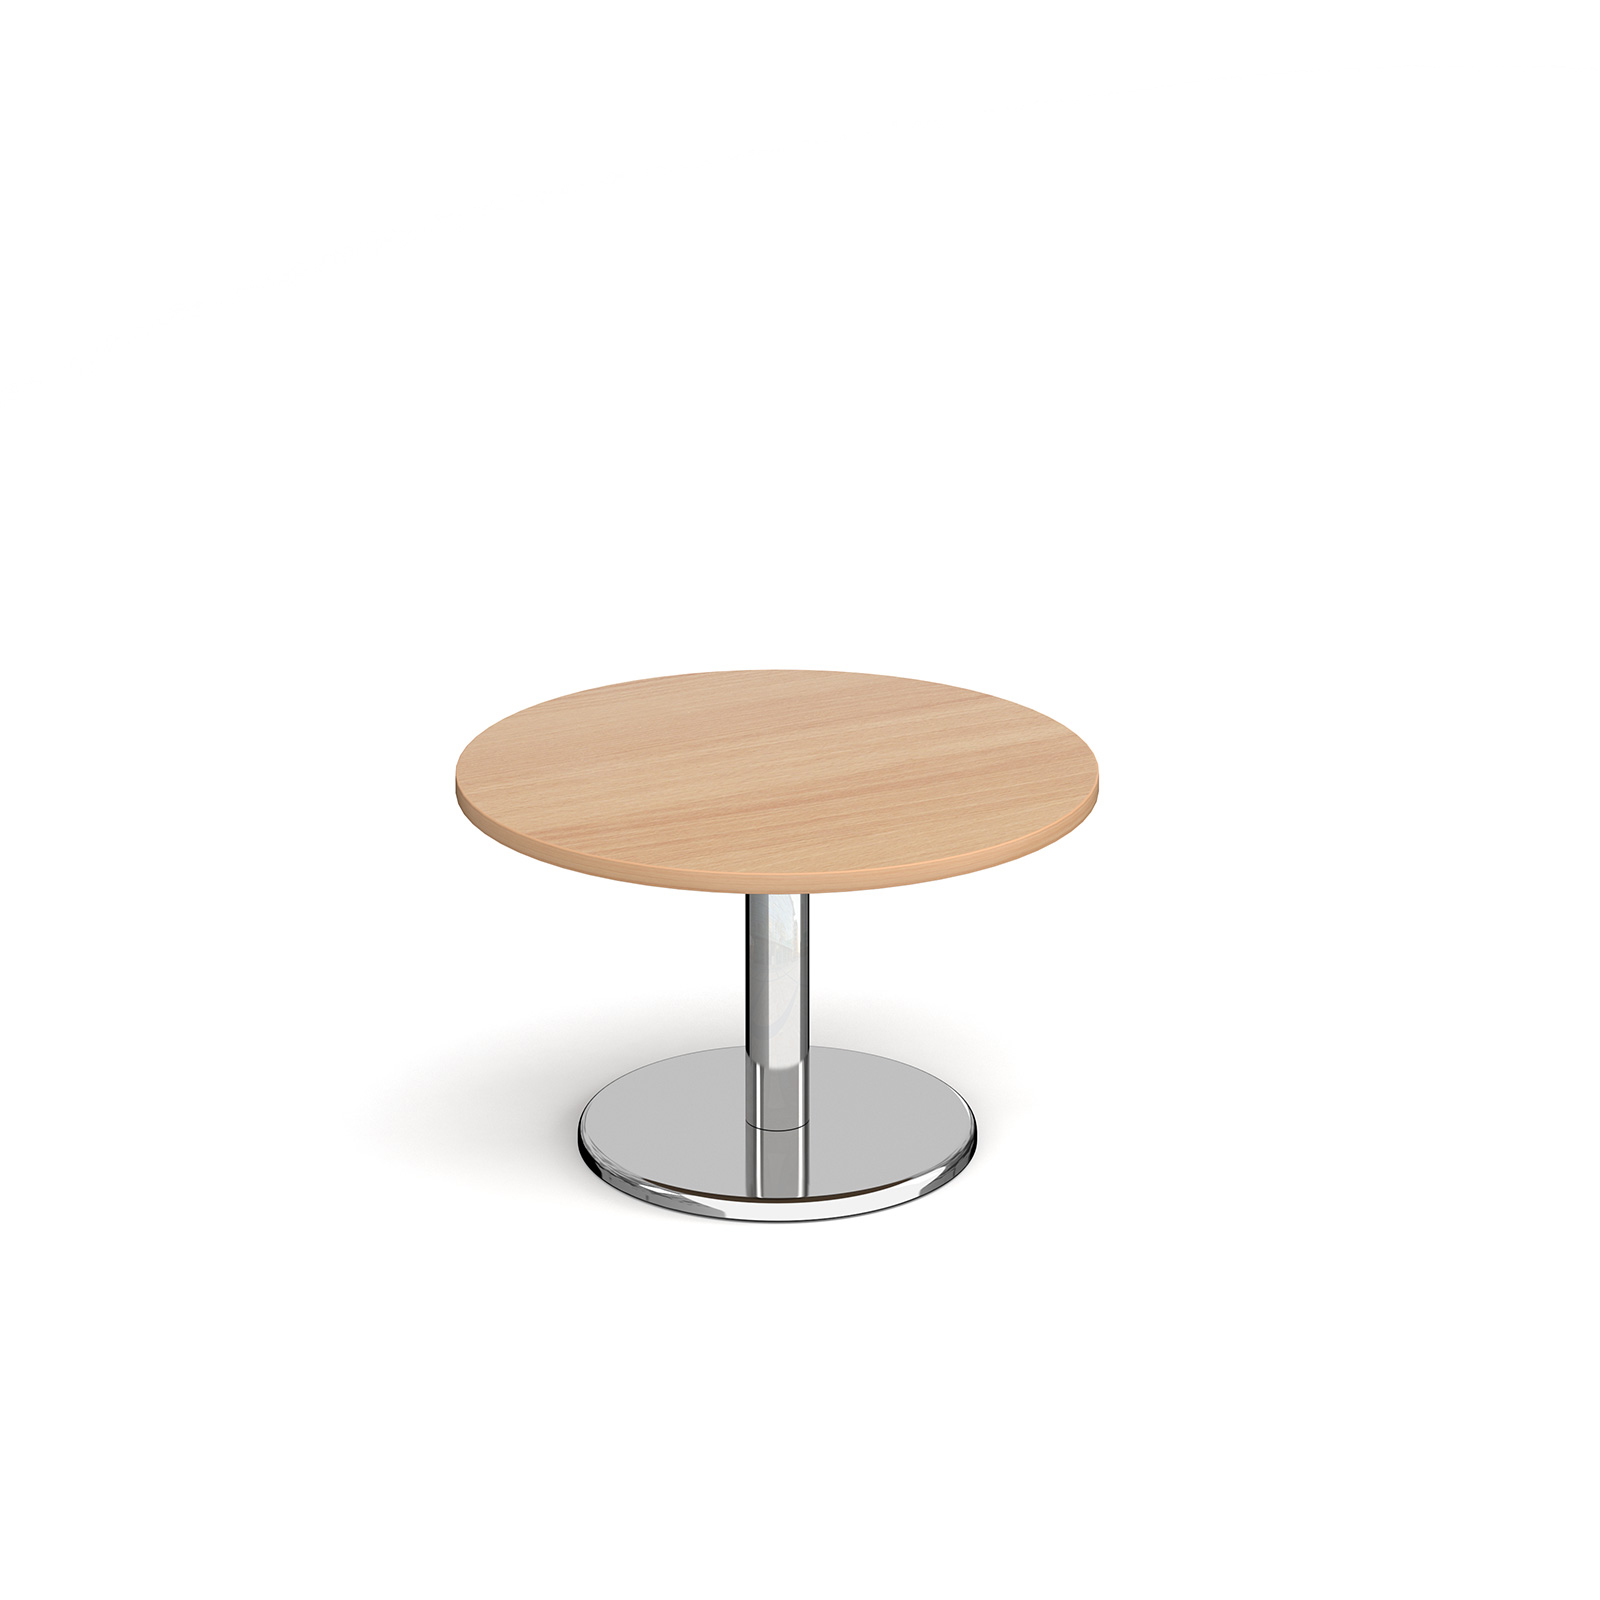 Pisa Circular Coffee Table with Round Chrome Base